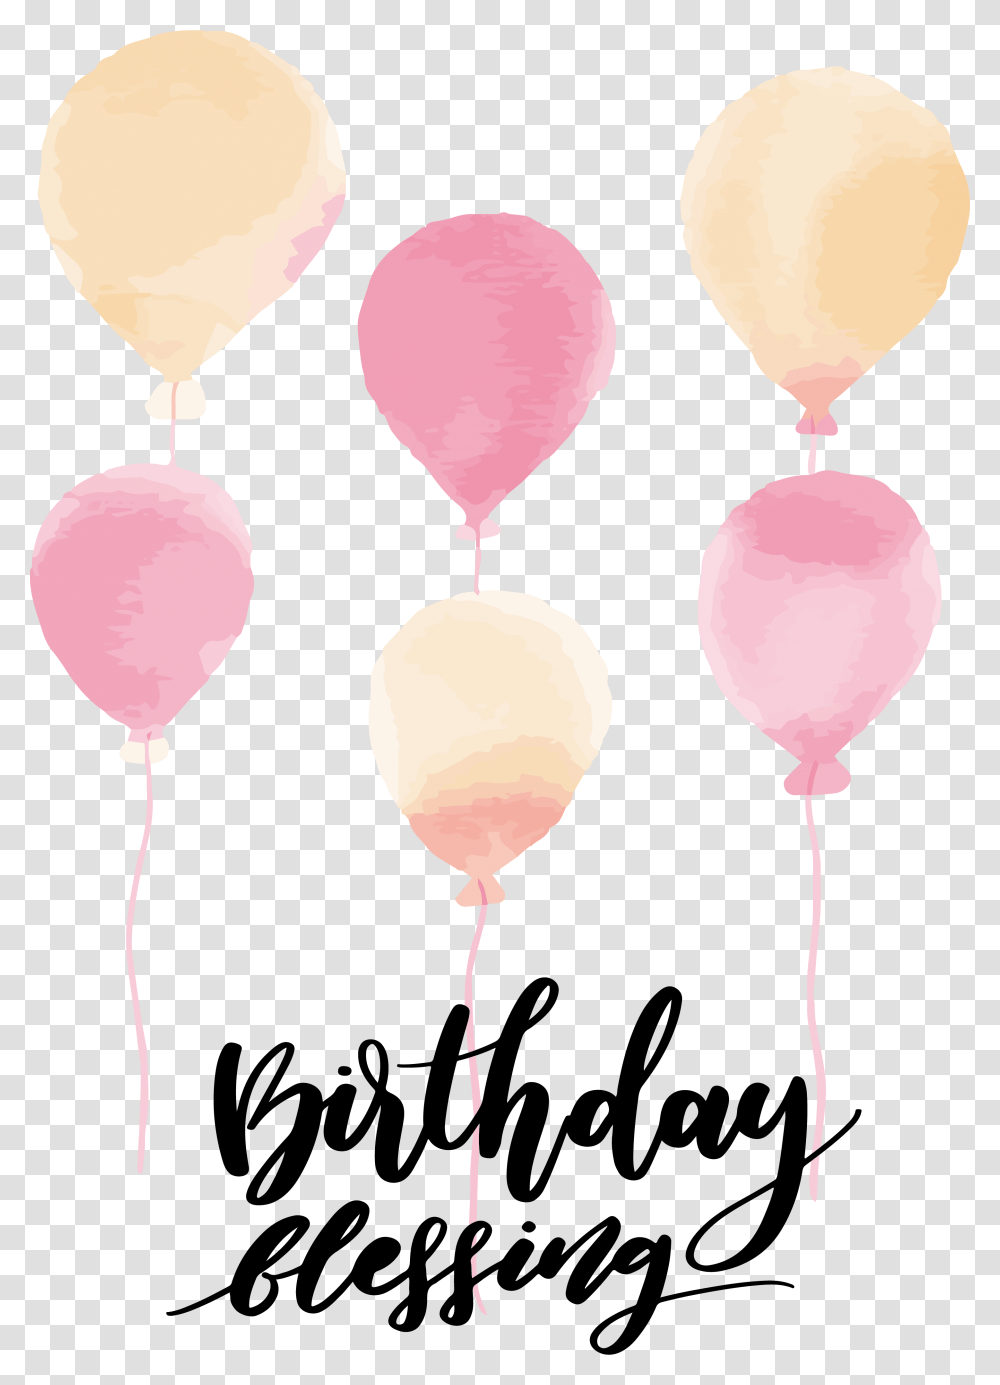 Watercolor Painting Balloon Computer File Balloon Transparent Png